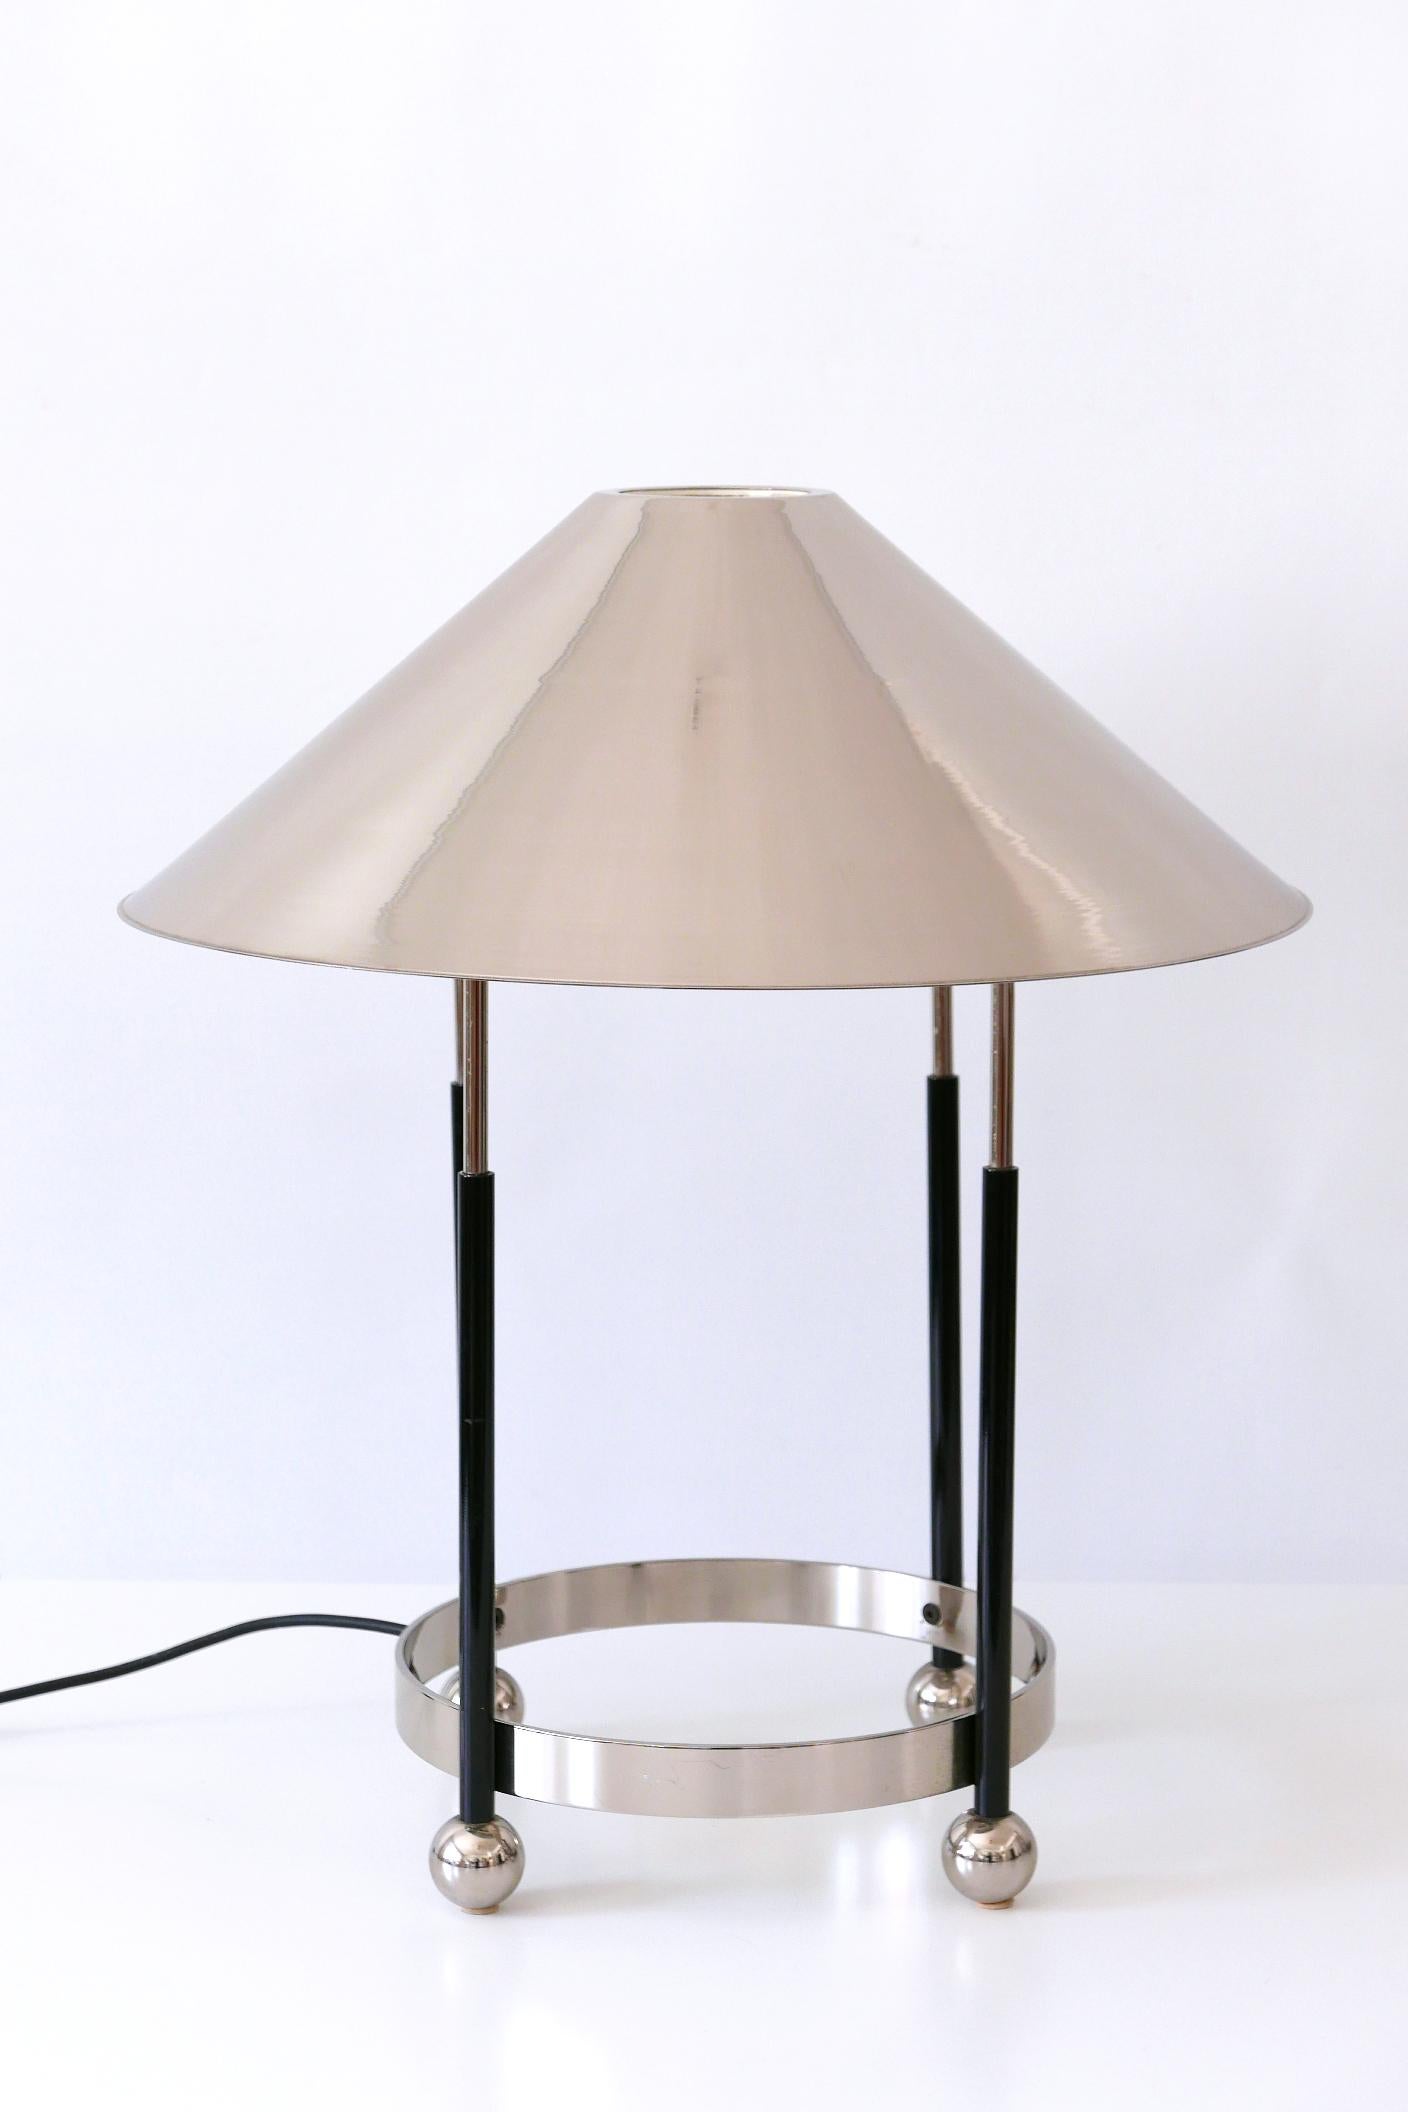 Monumental Mid-Century Modern Nickel-Plated Brass Table Lamp 1970s, Germany For Sale 7